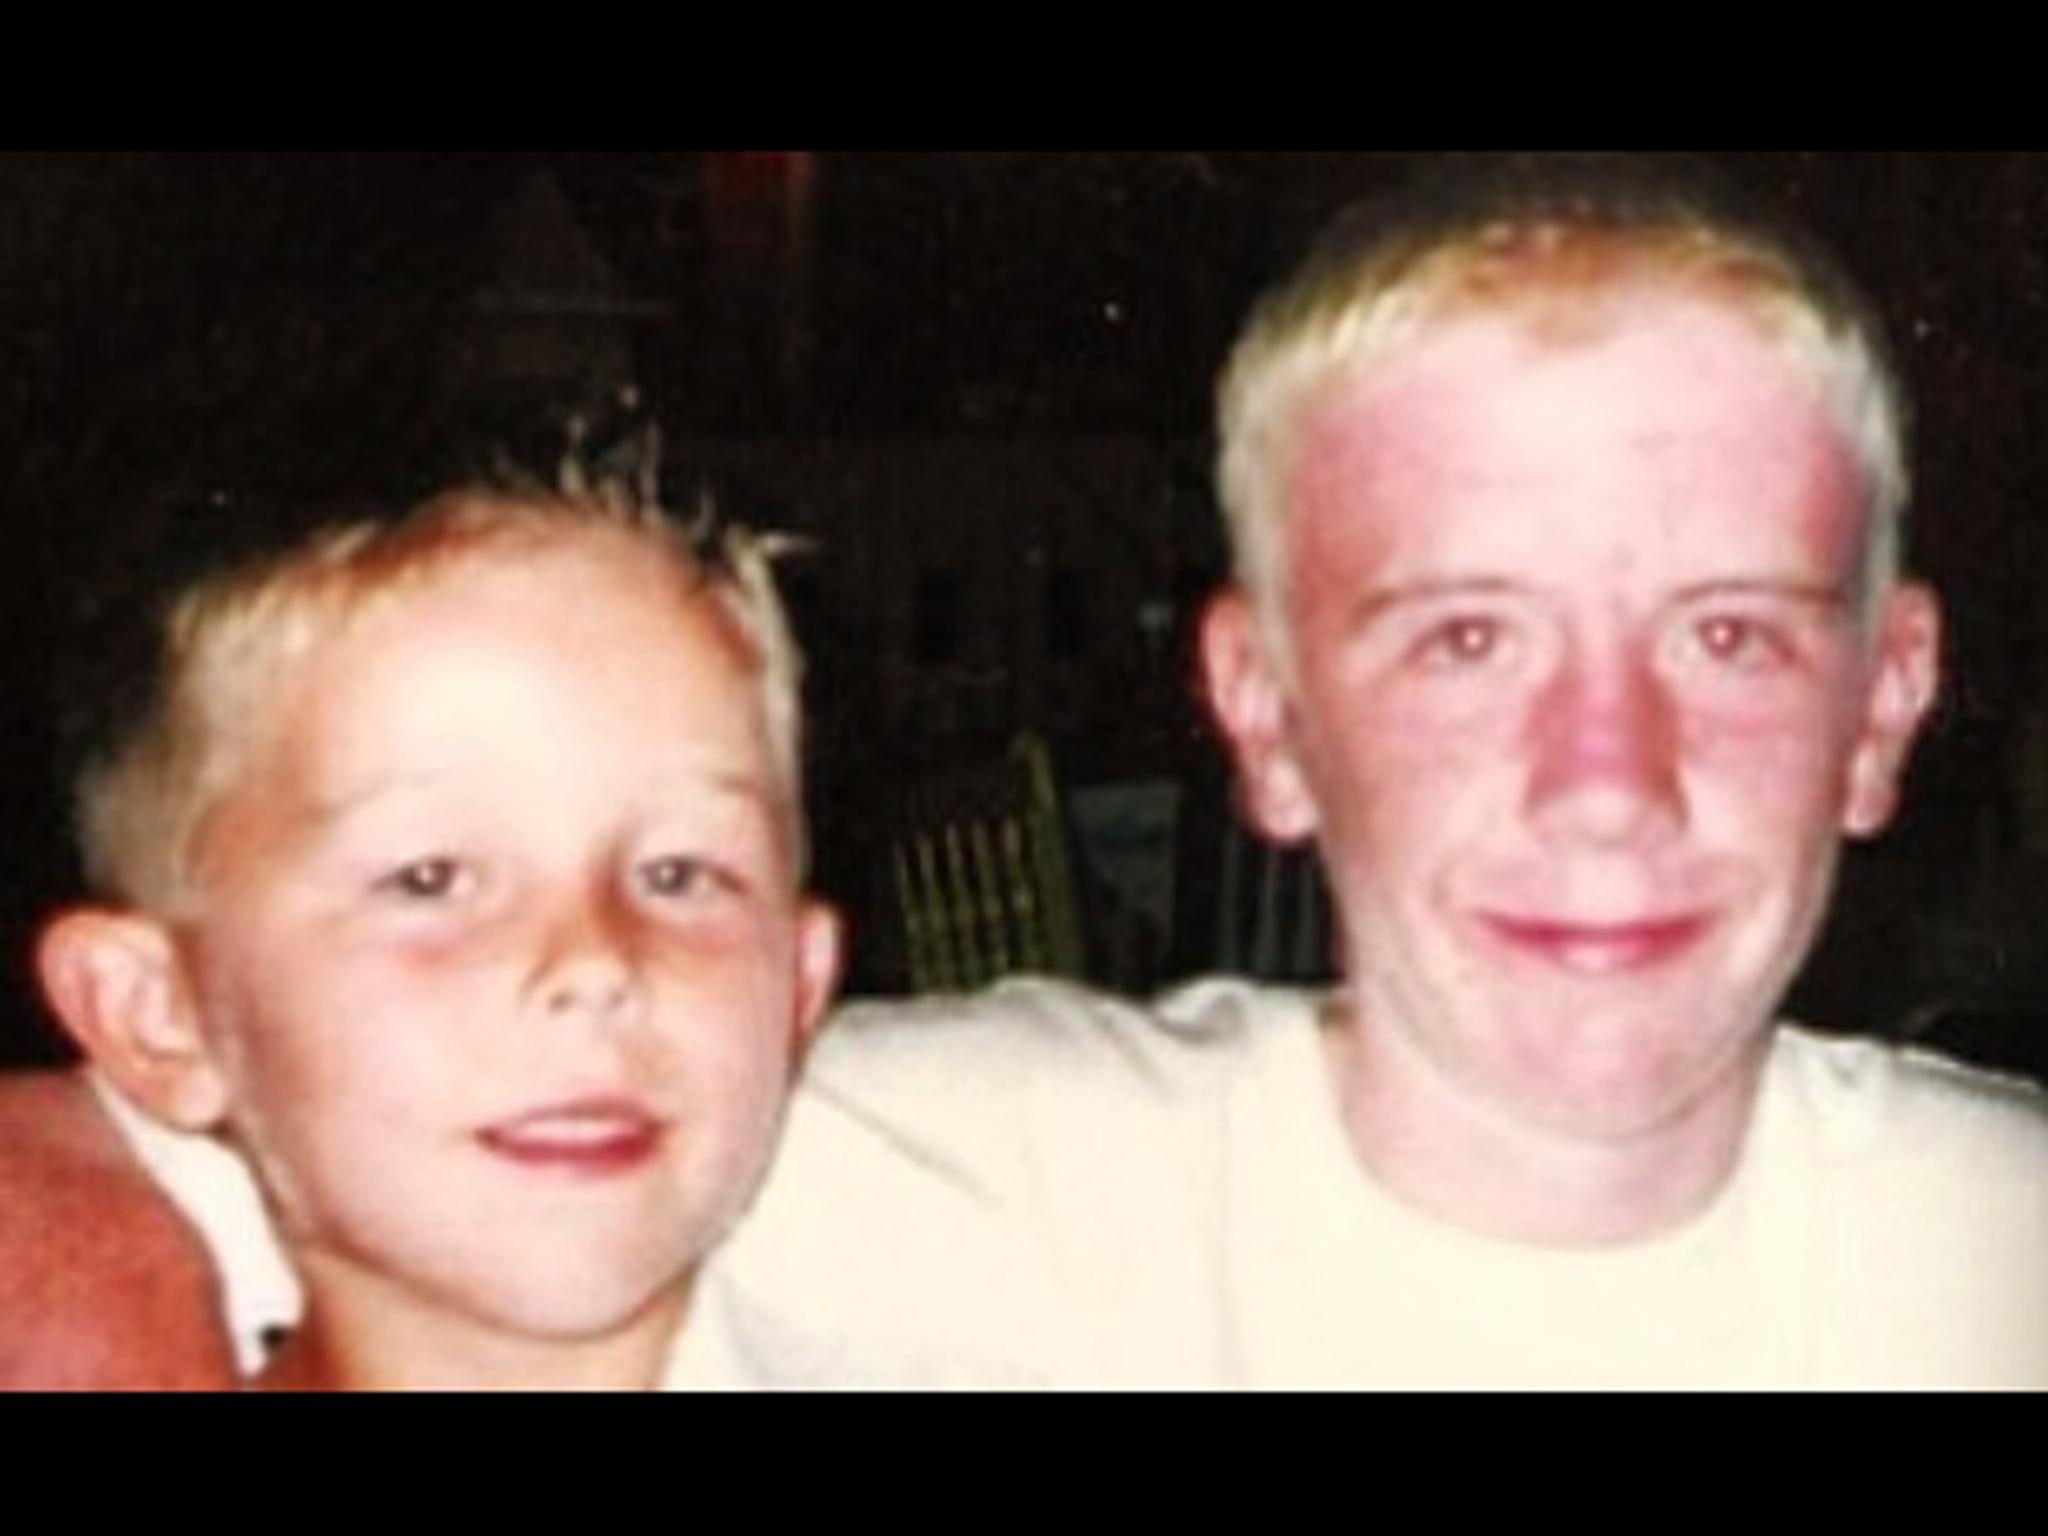 Matthew Smith with brother Daniel, who took his life aged 19